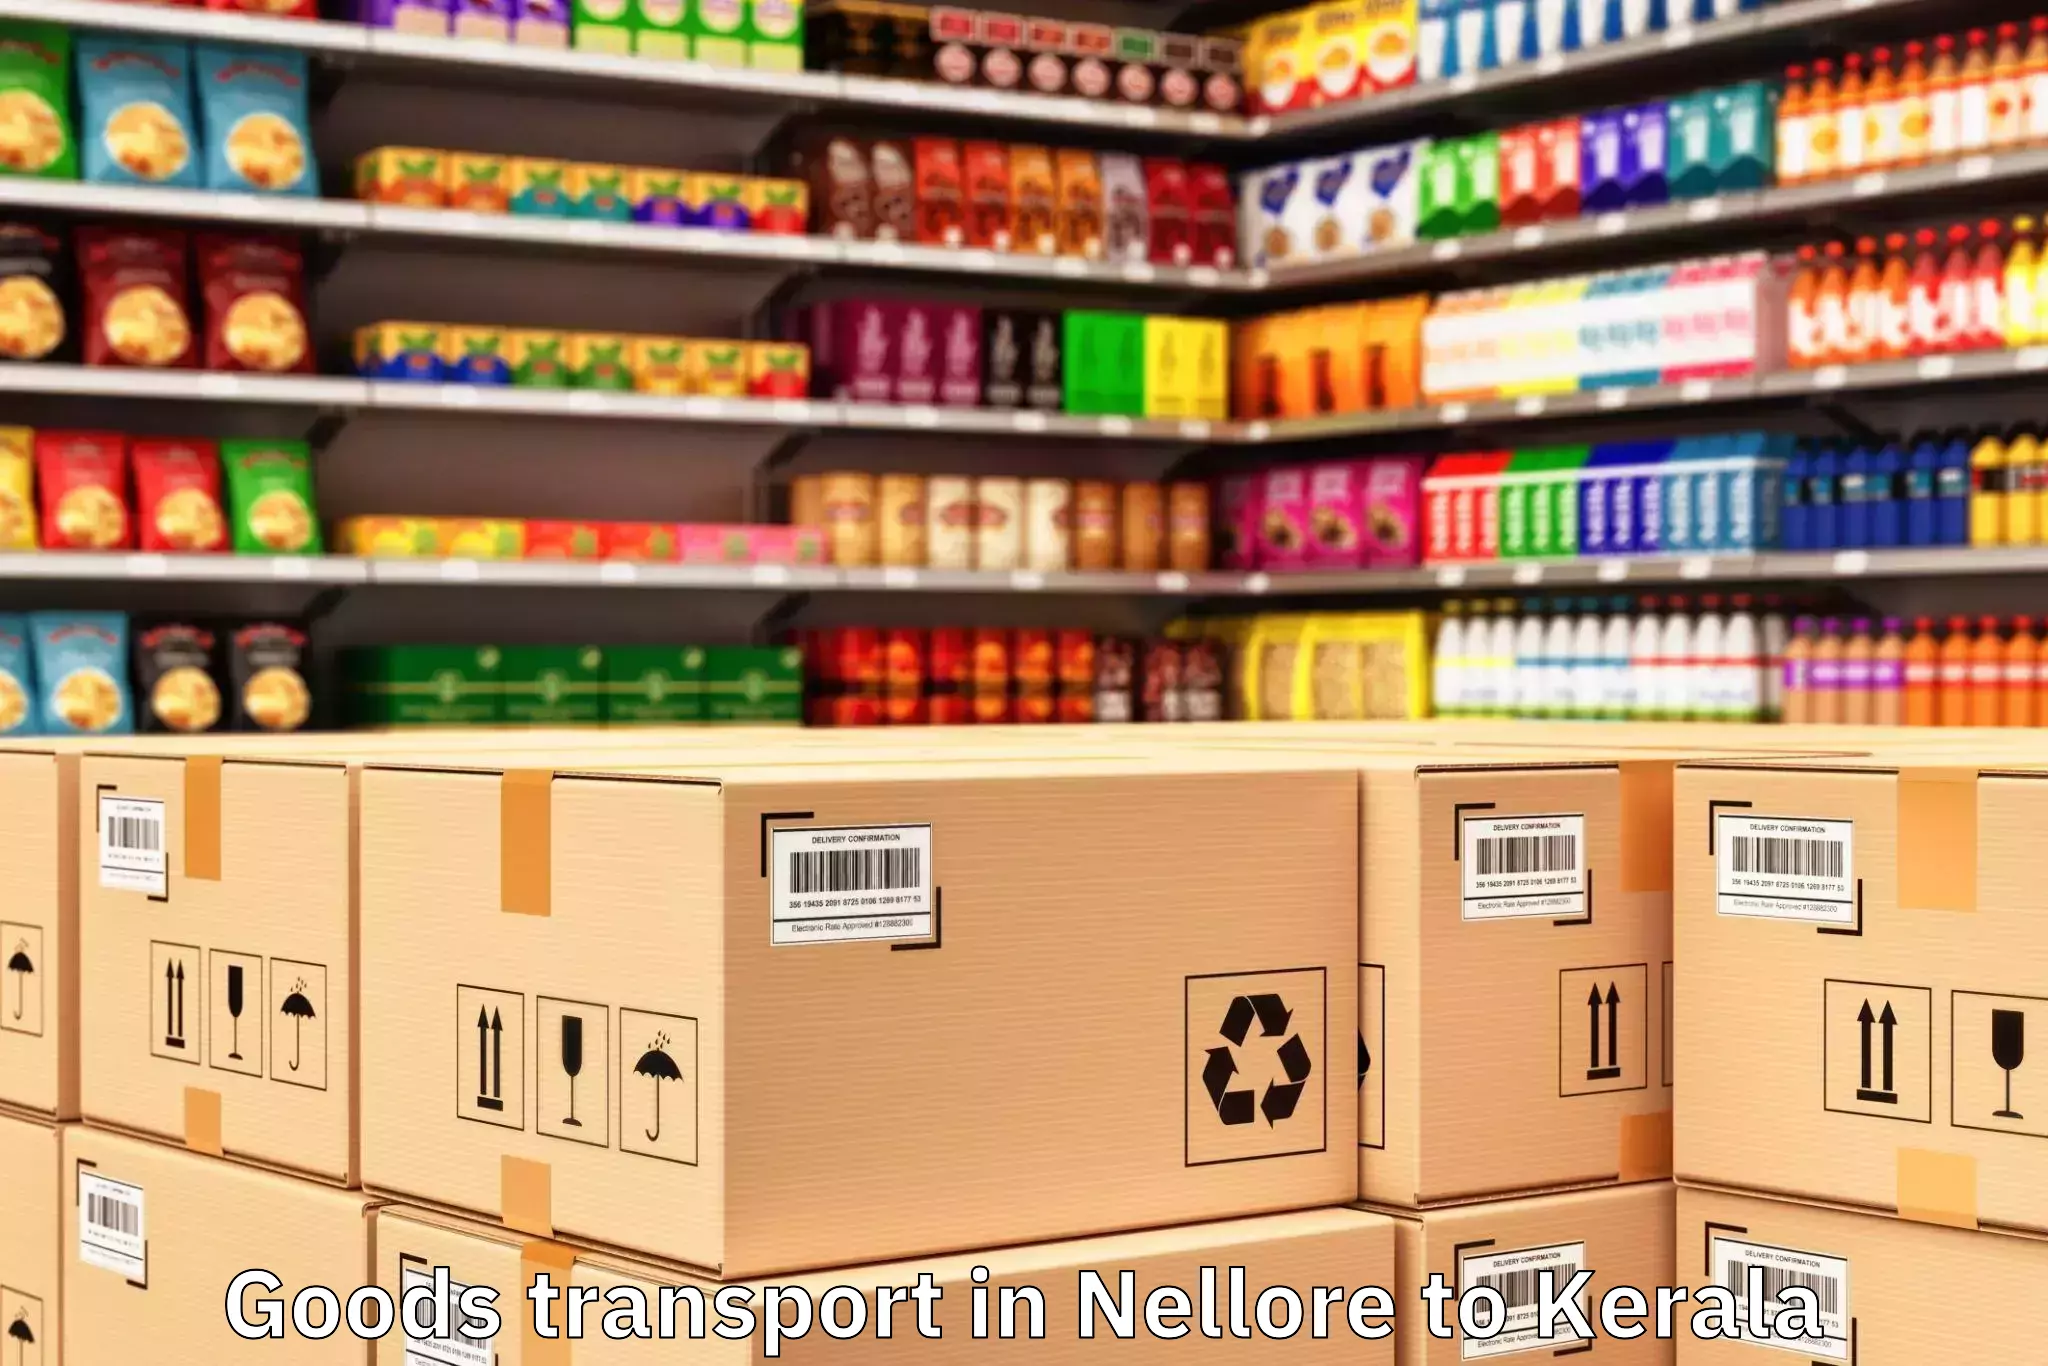 Affordable Nellore to Calicut International Airport Ccj Goods Transport